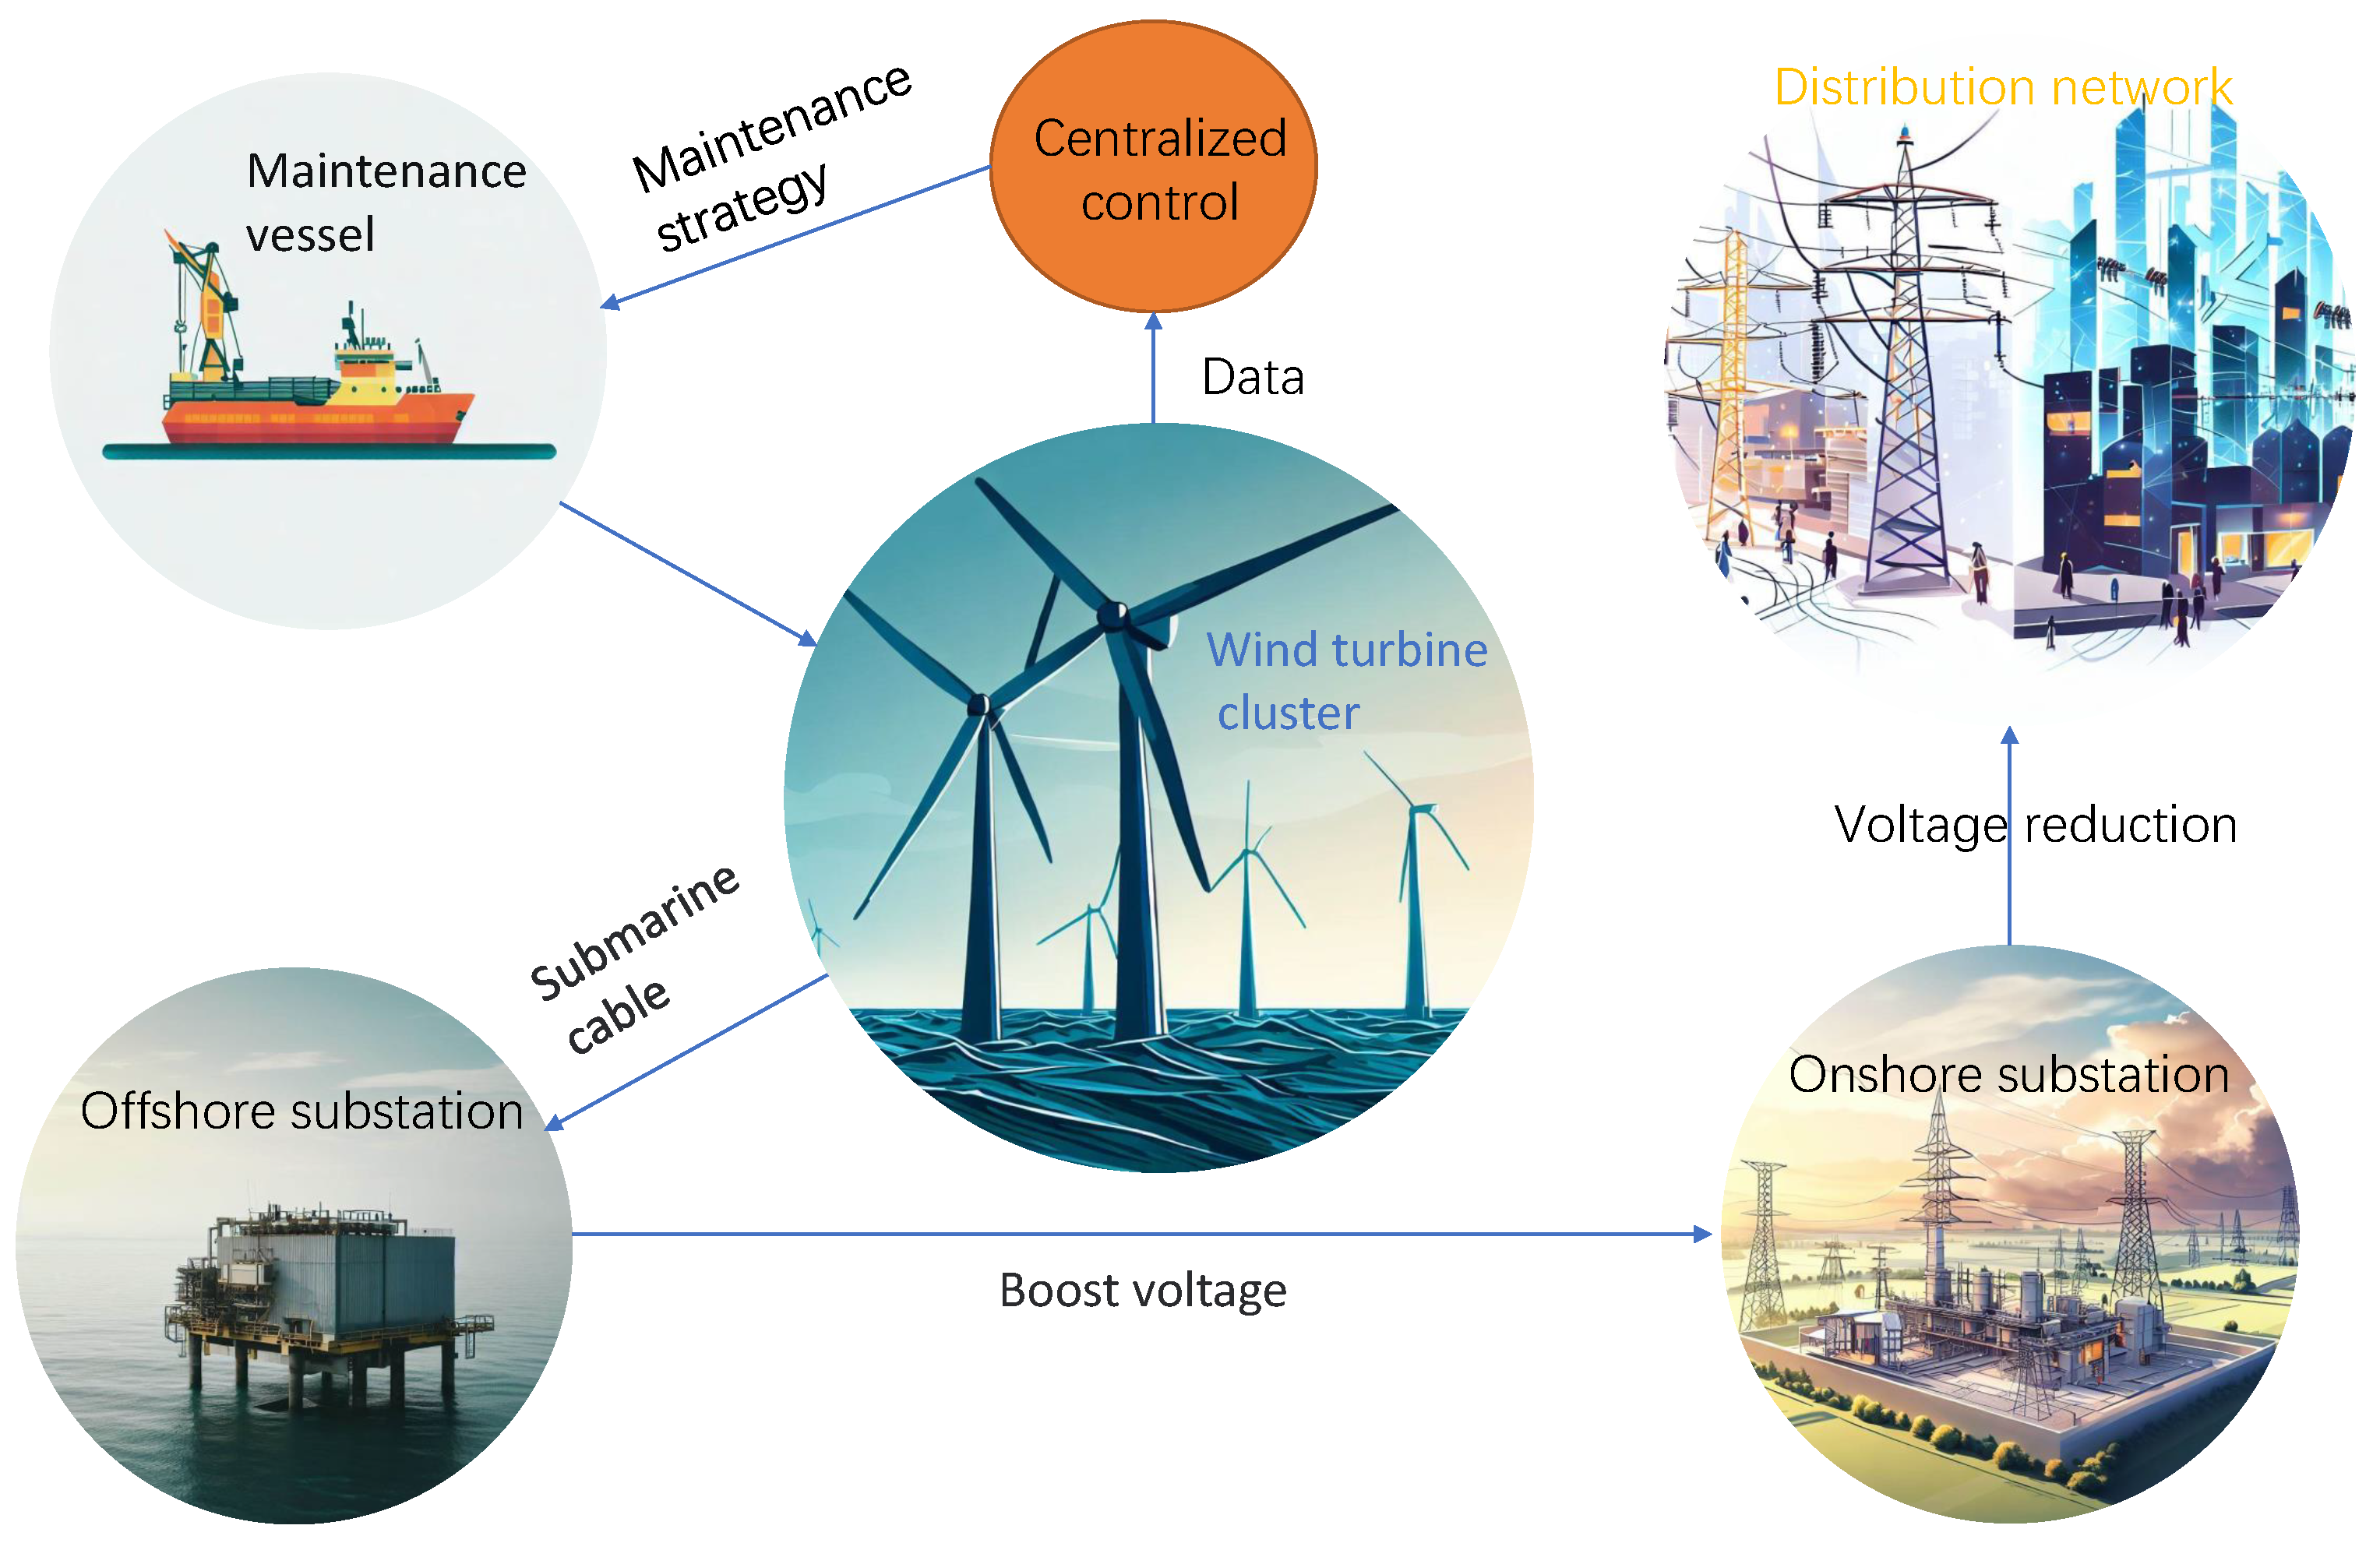 The offshore wind farm O&M procedures